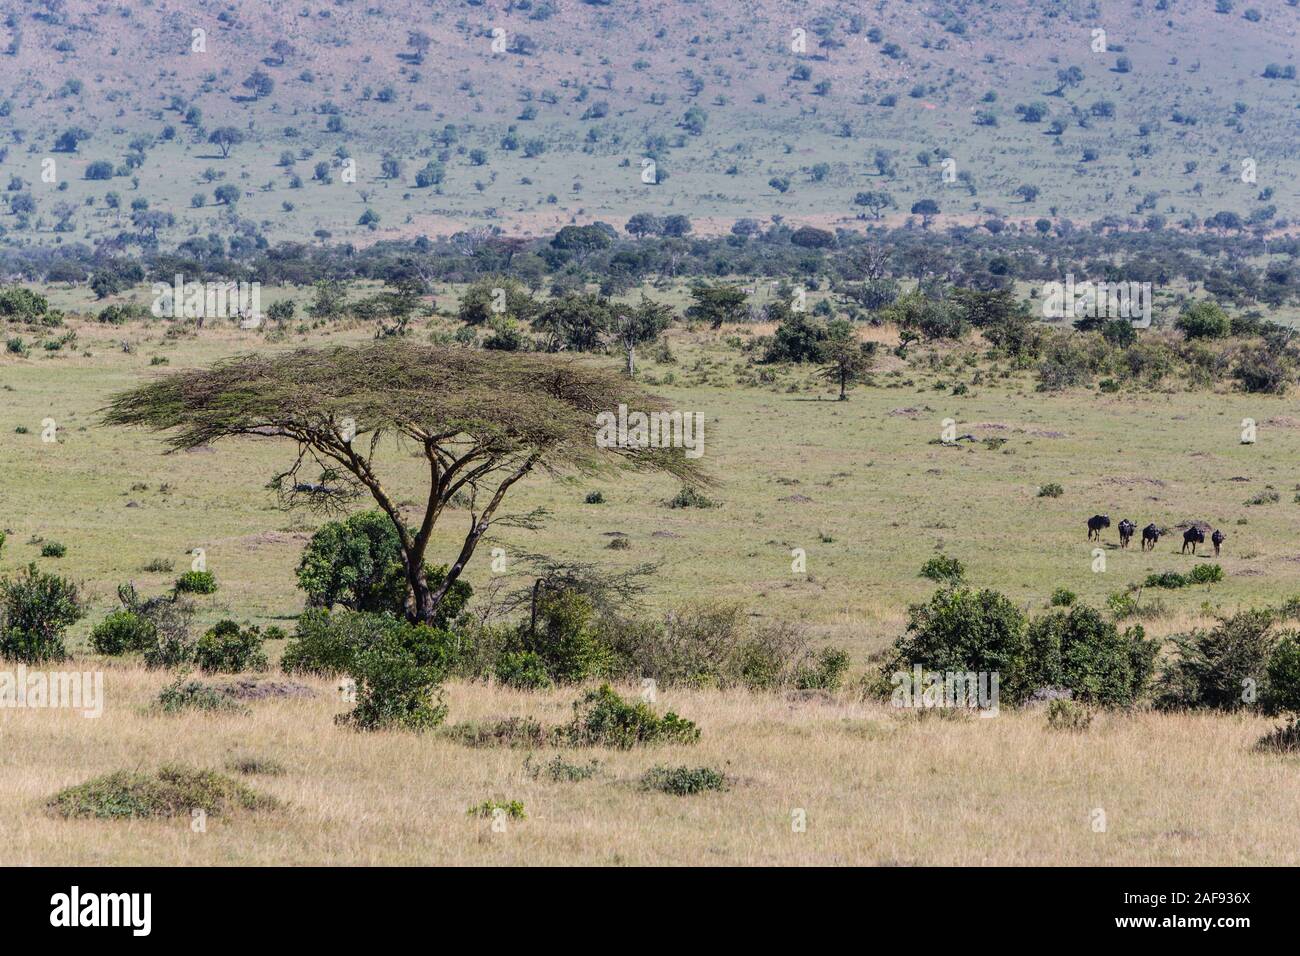 Tanzania. Scenic View,  Loliondo Concession area, adjacent to Serengeti National Park, northeast. Wildebeest lower right. Stock Photo